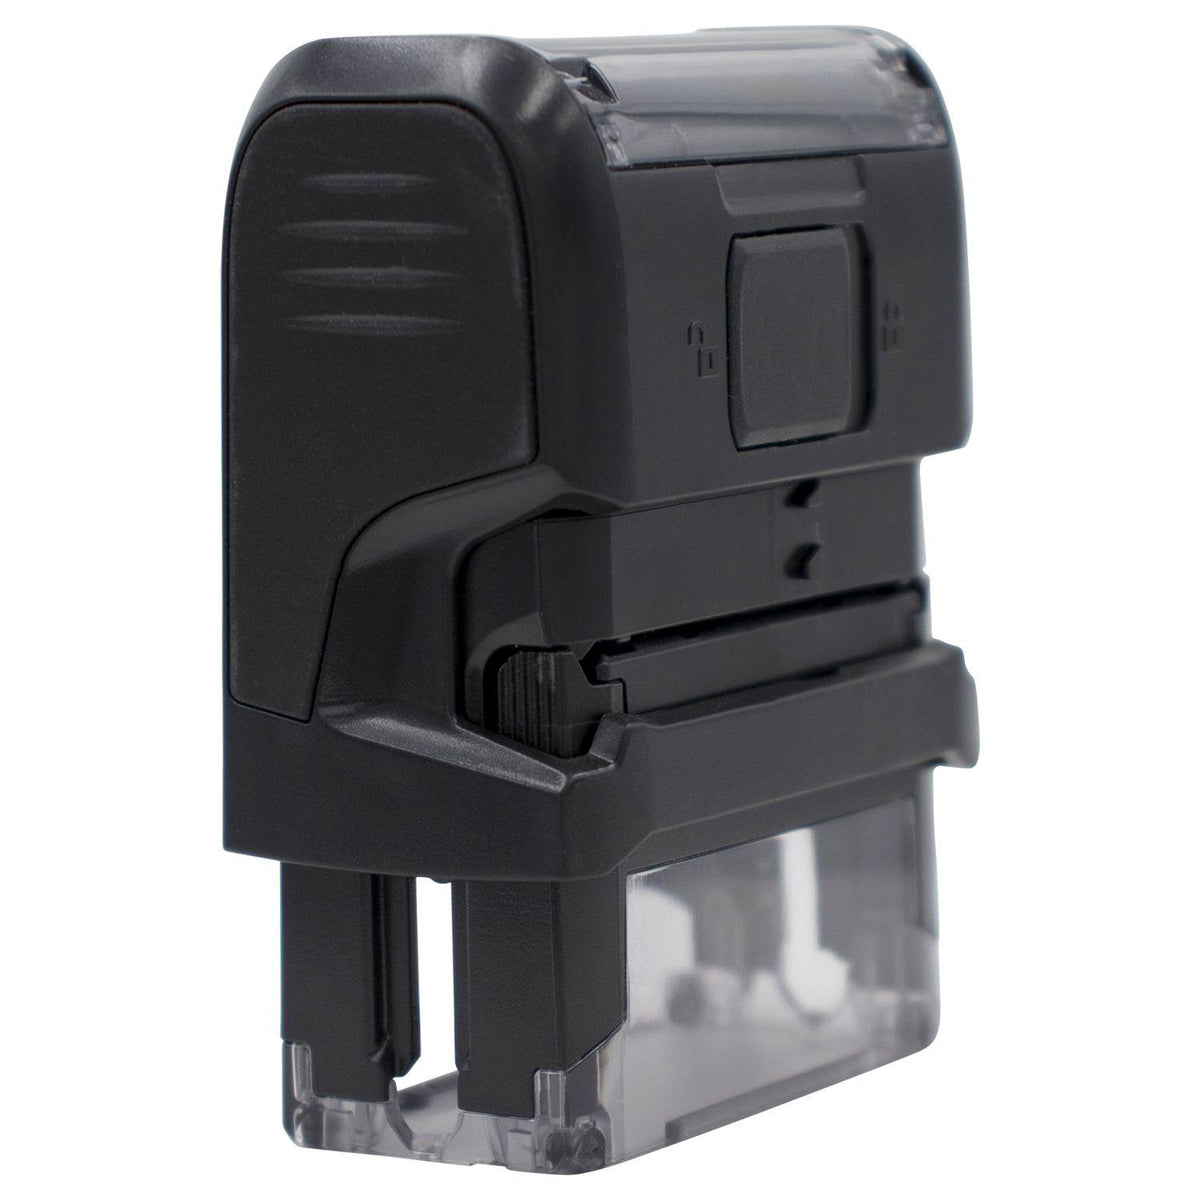 Self Inking Clients Copy Stamp - Engineer Seal Stamps - Brand_Trodat, Impression Size_Small, Stamp Type_Self-Inking Stamp, Type of Use_Legal